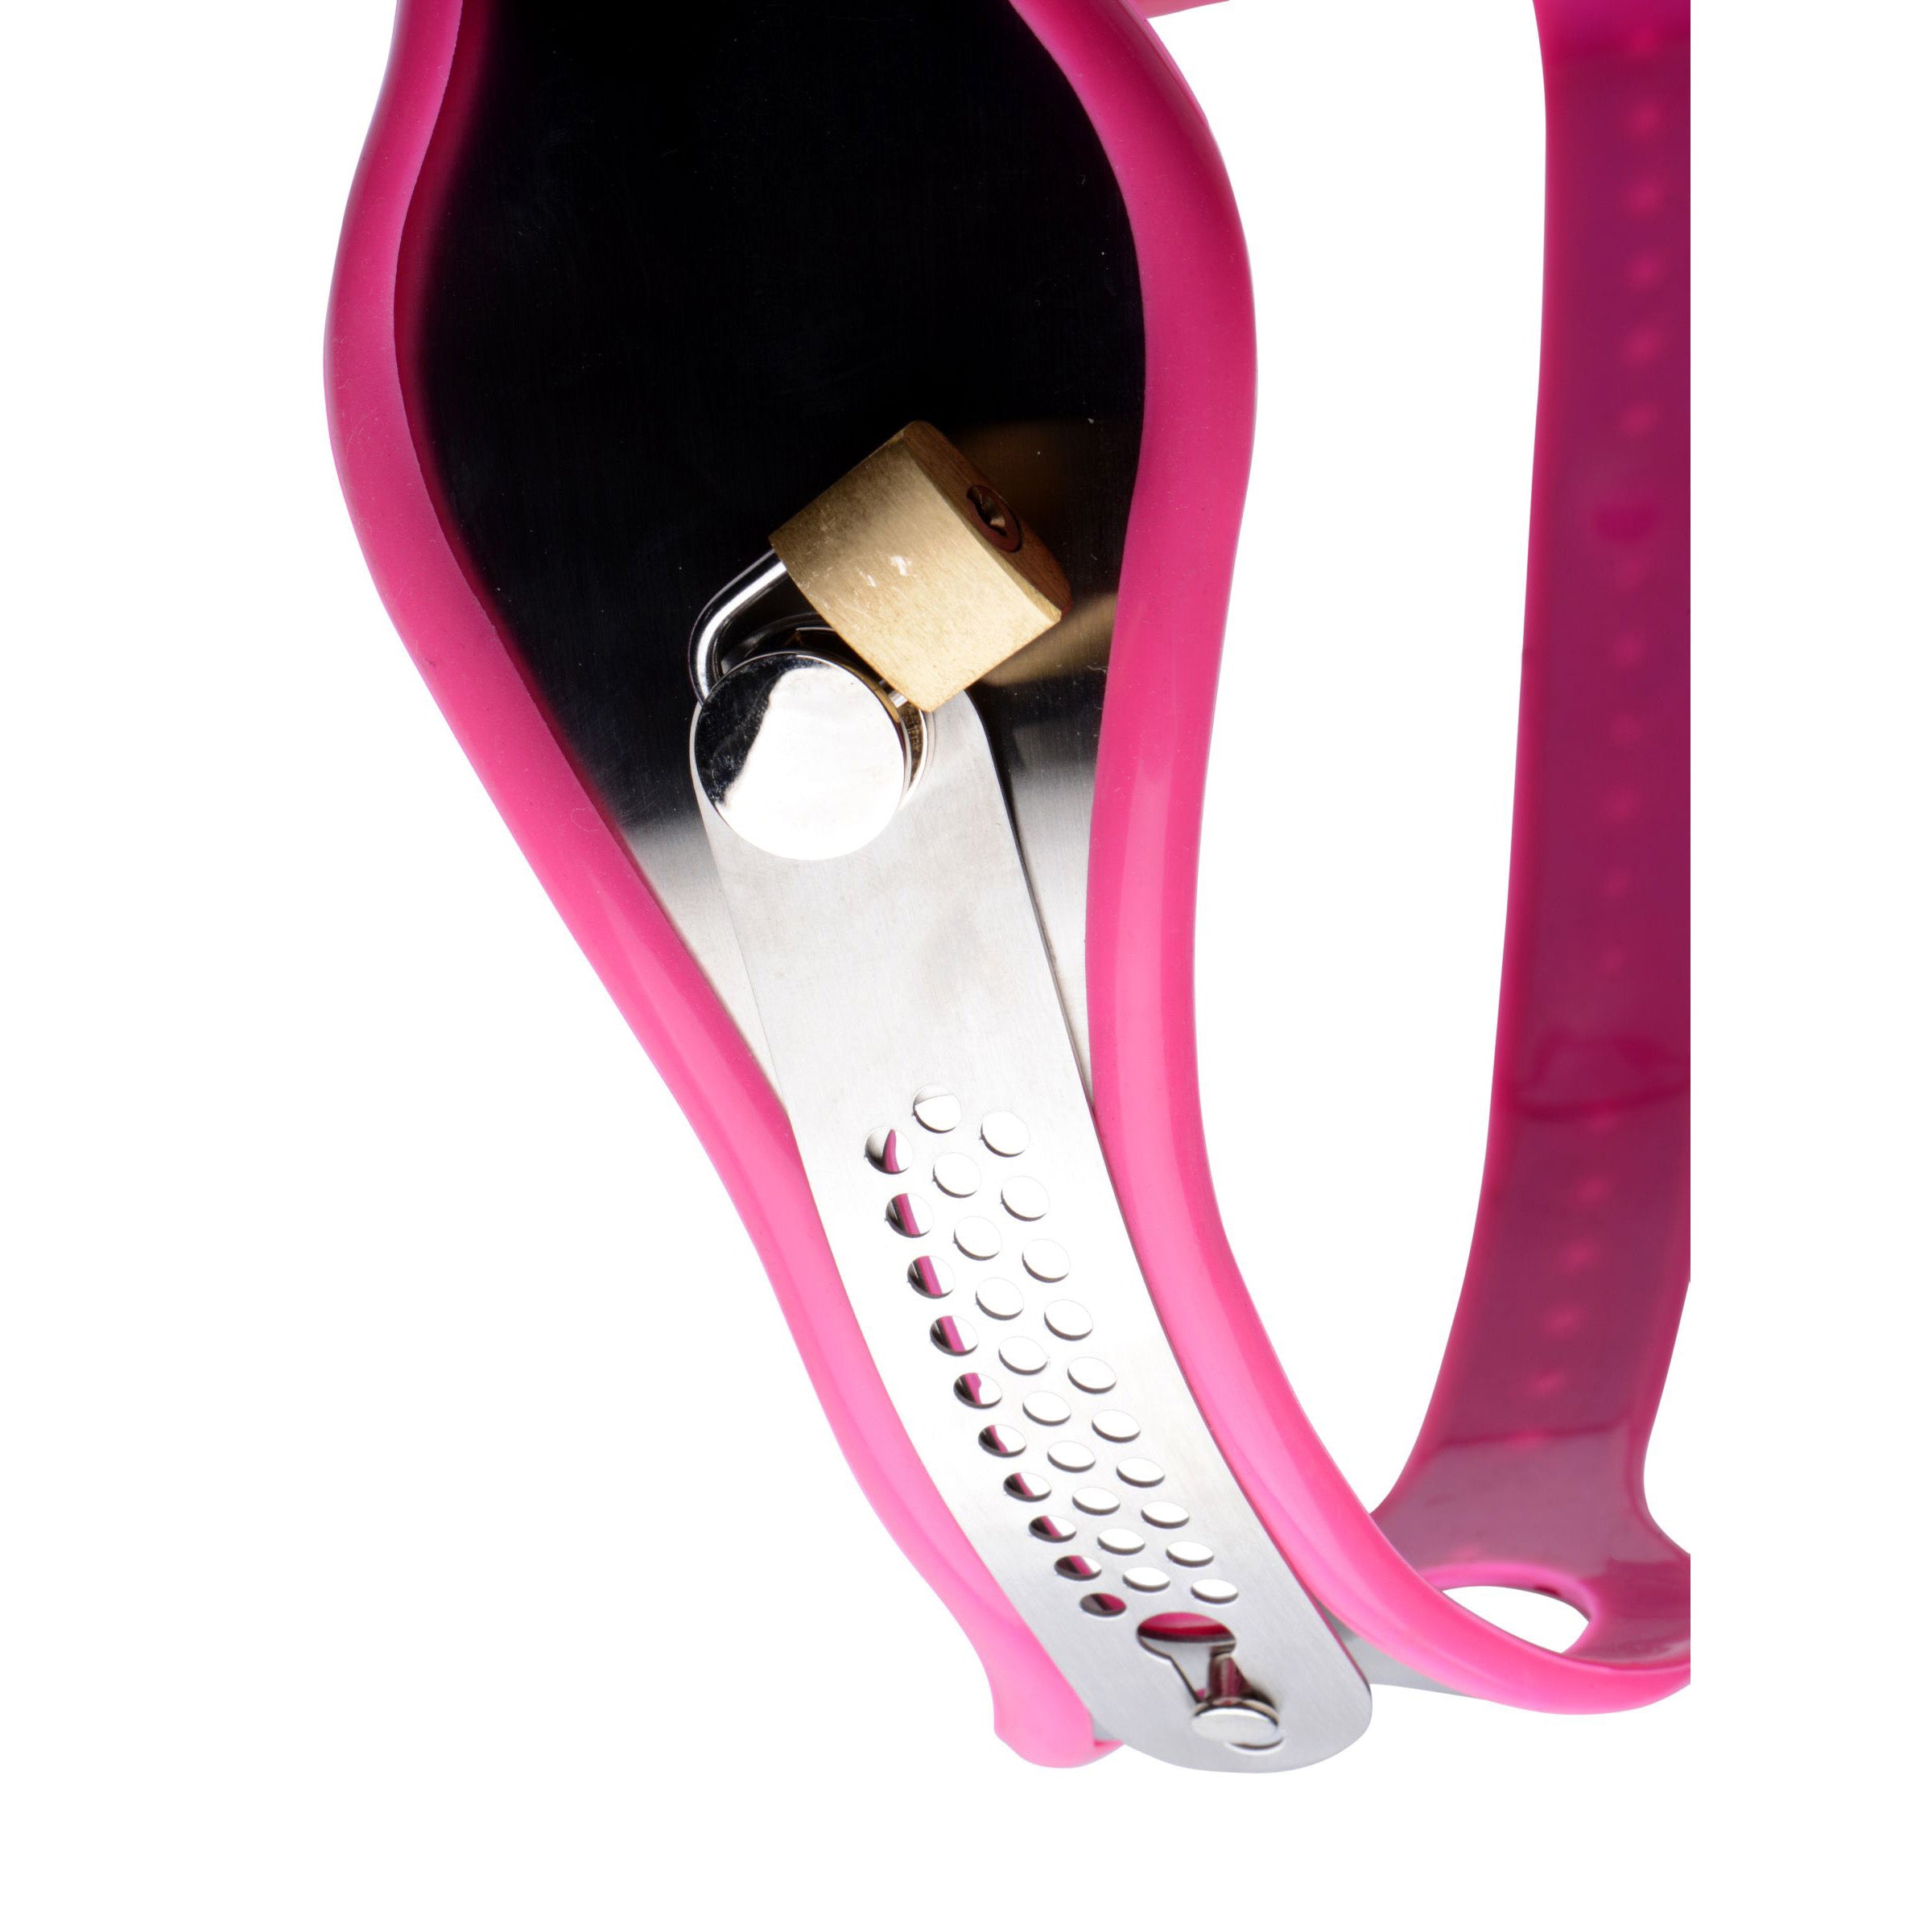 Pink Stainless Steel Adjustable Female Chastity Belt